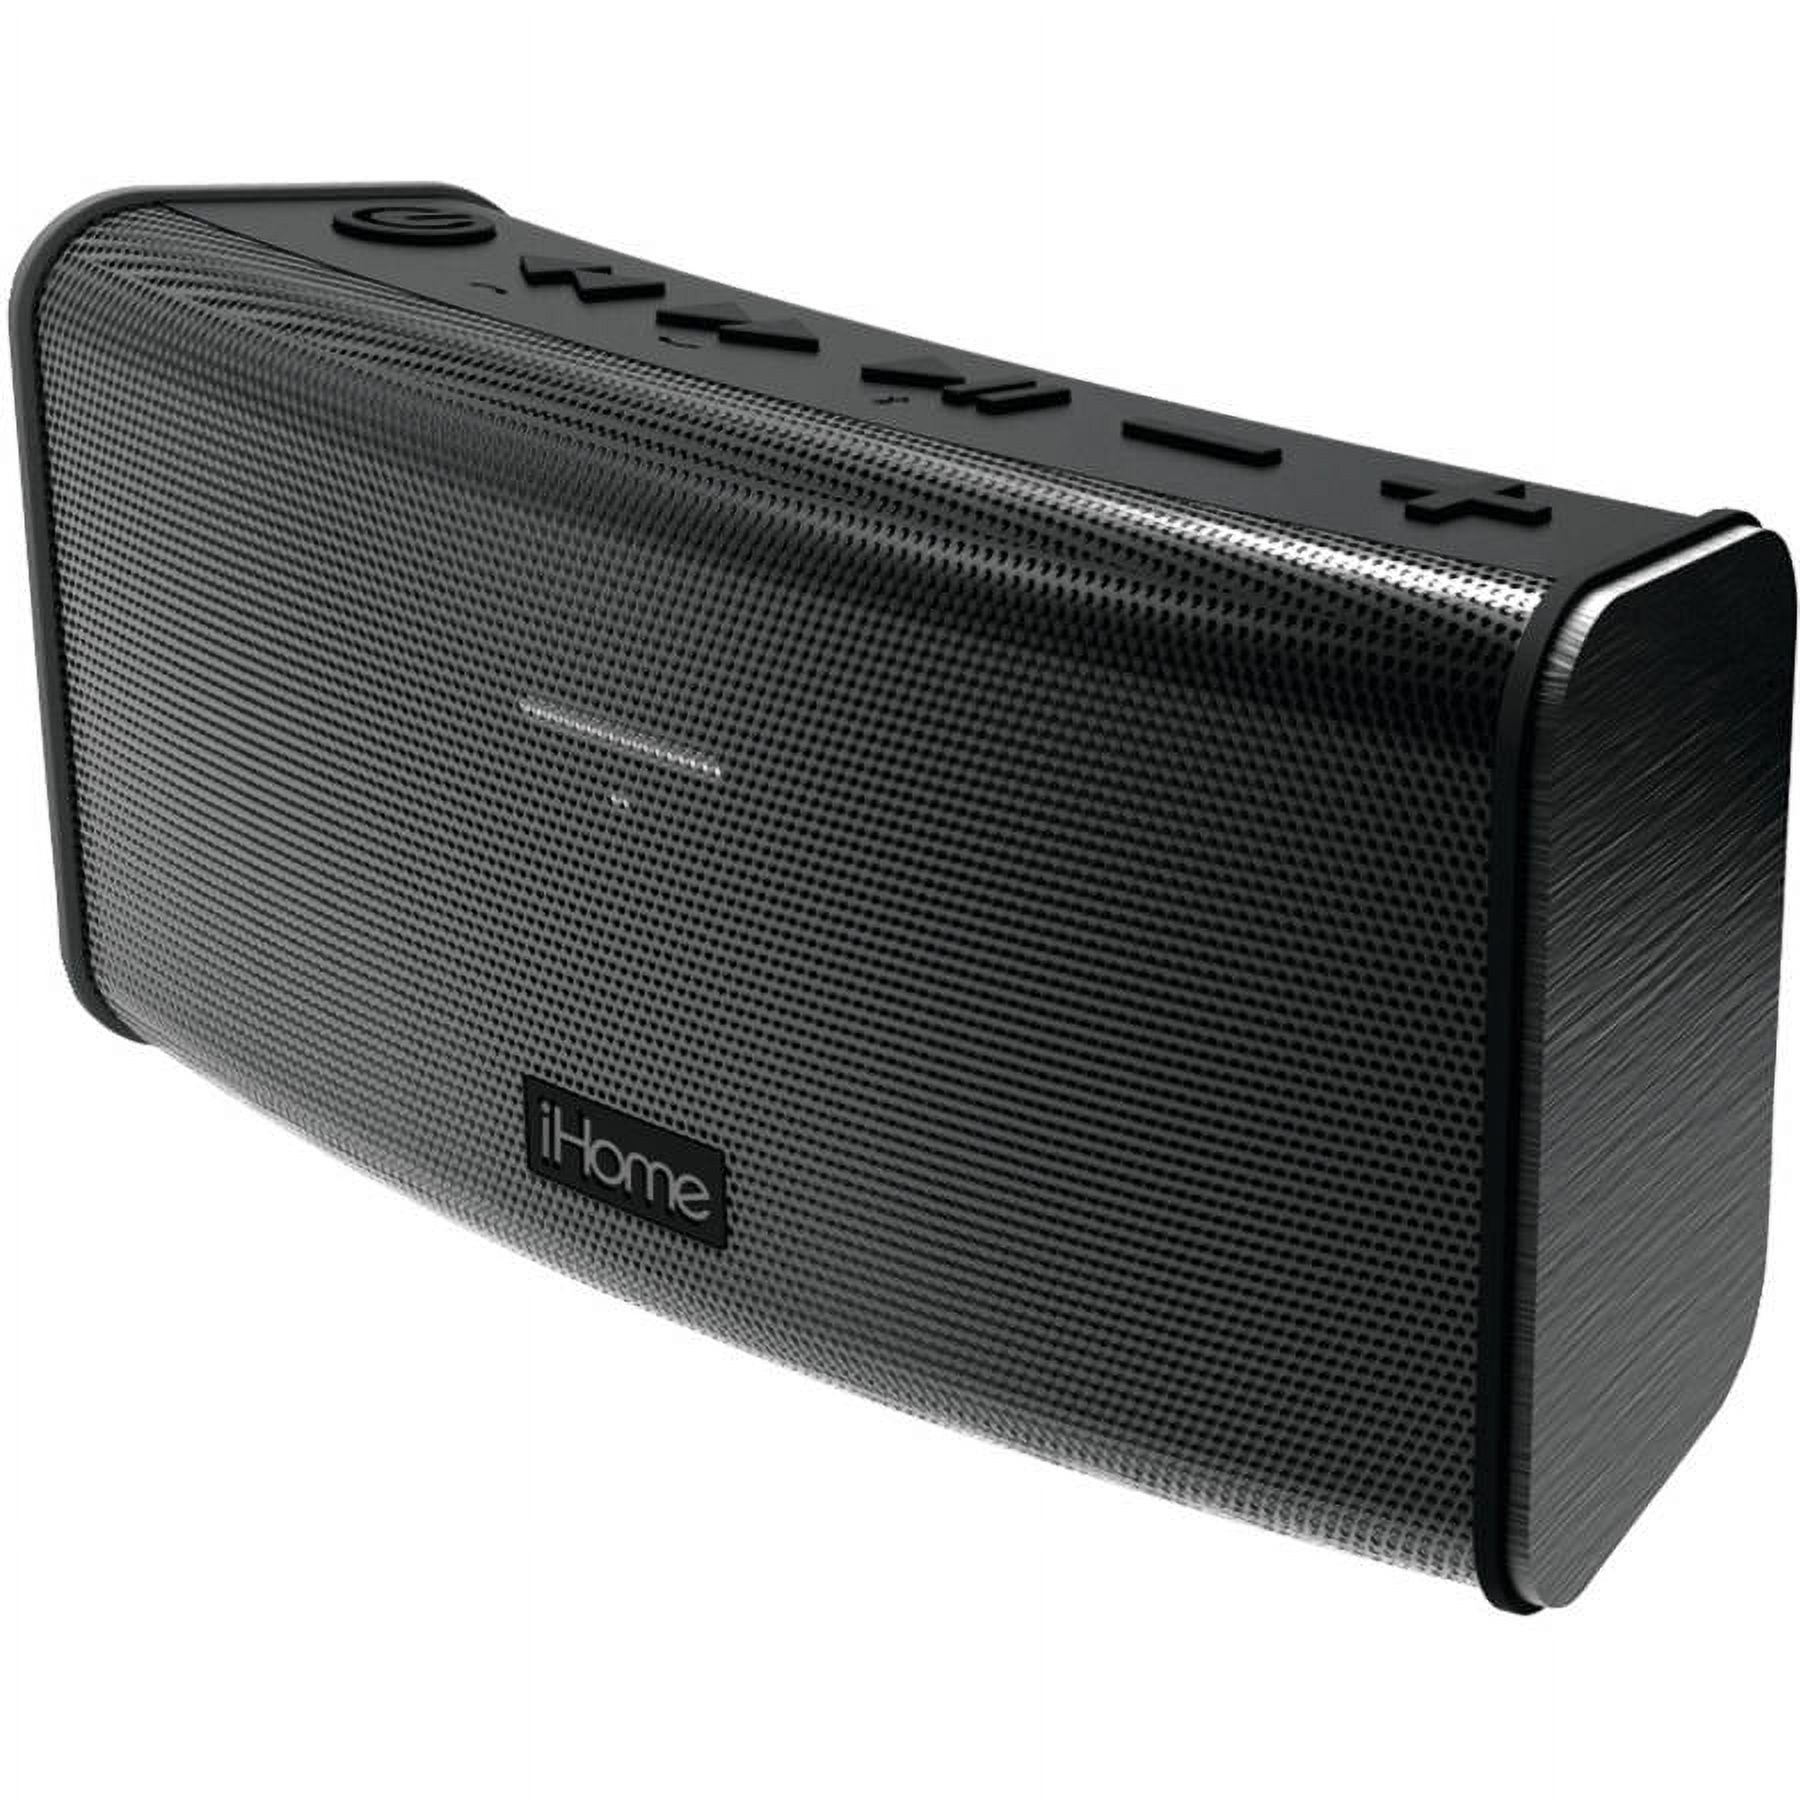 iHome Rechargeable Stereo Bluetooth Speaker with Speakerphone - image 1 of 10